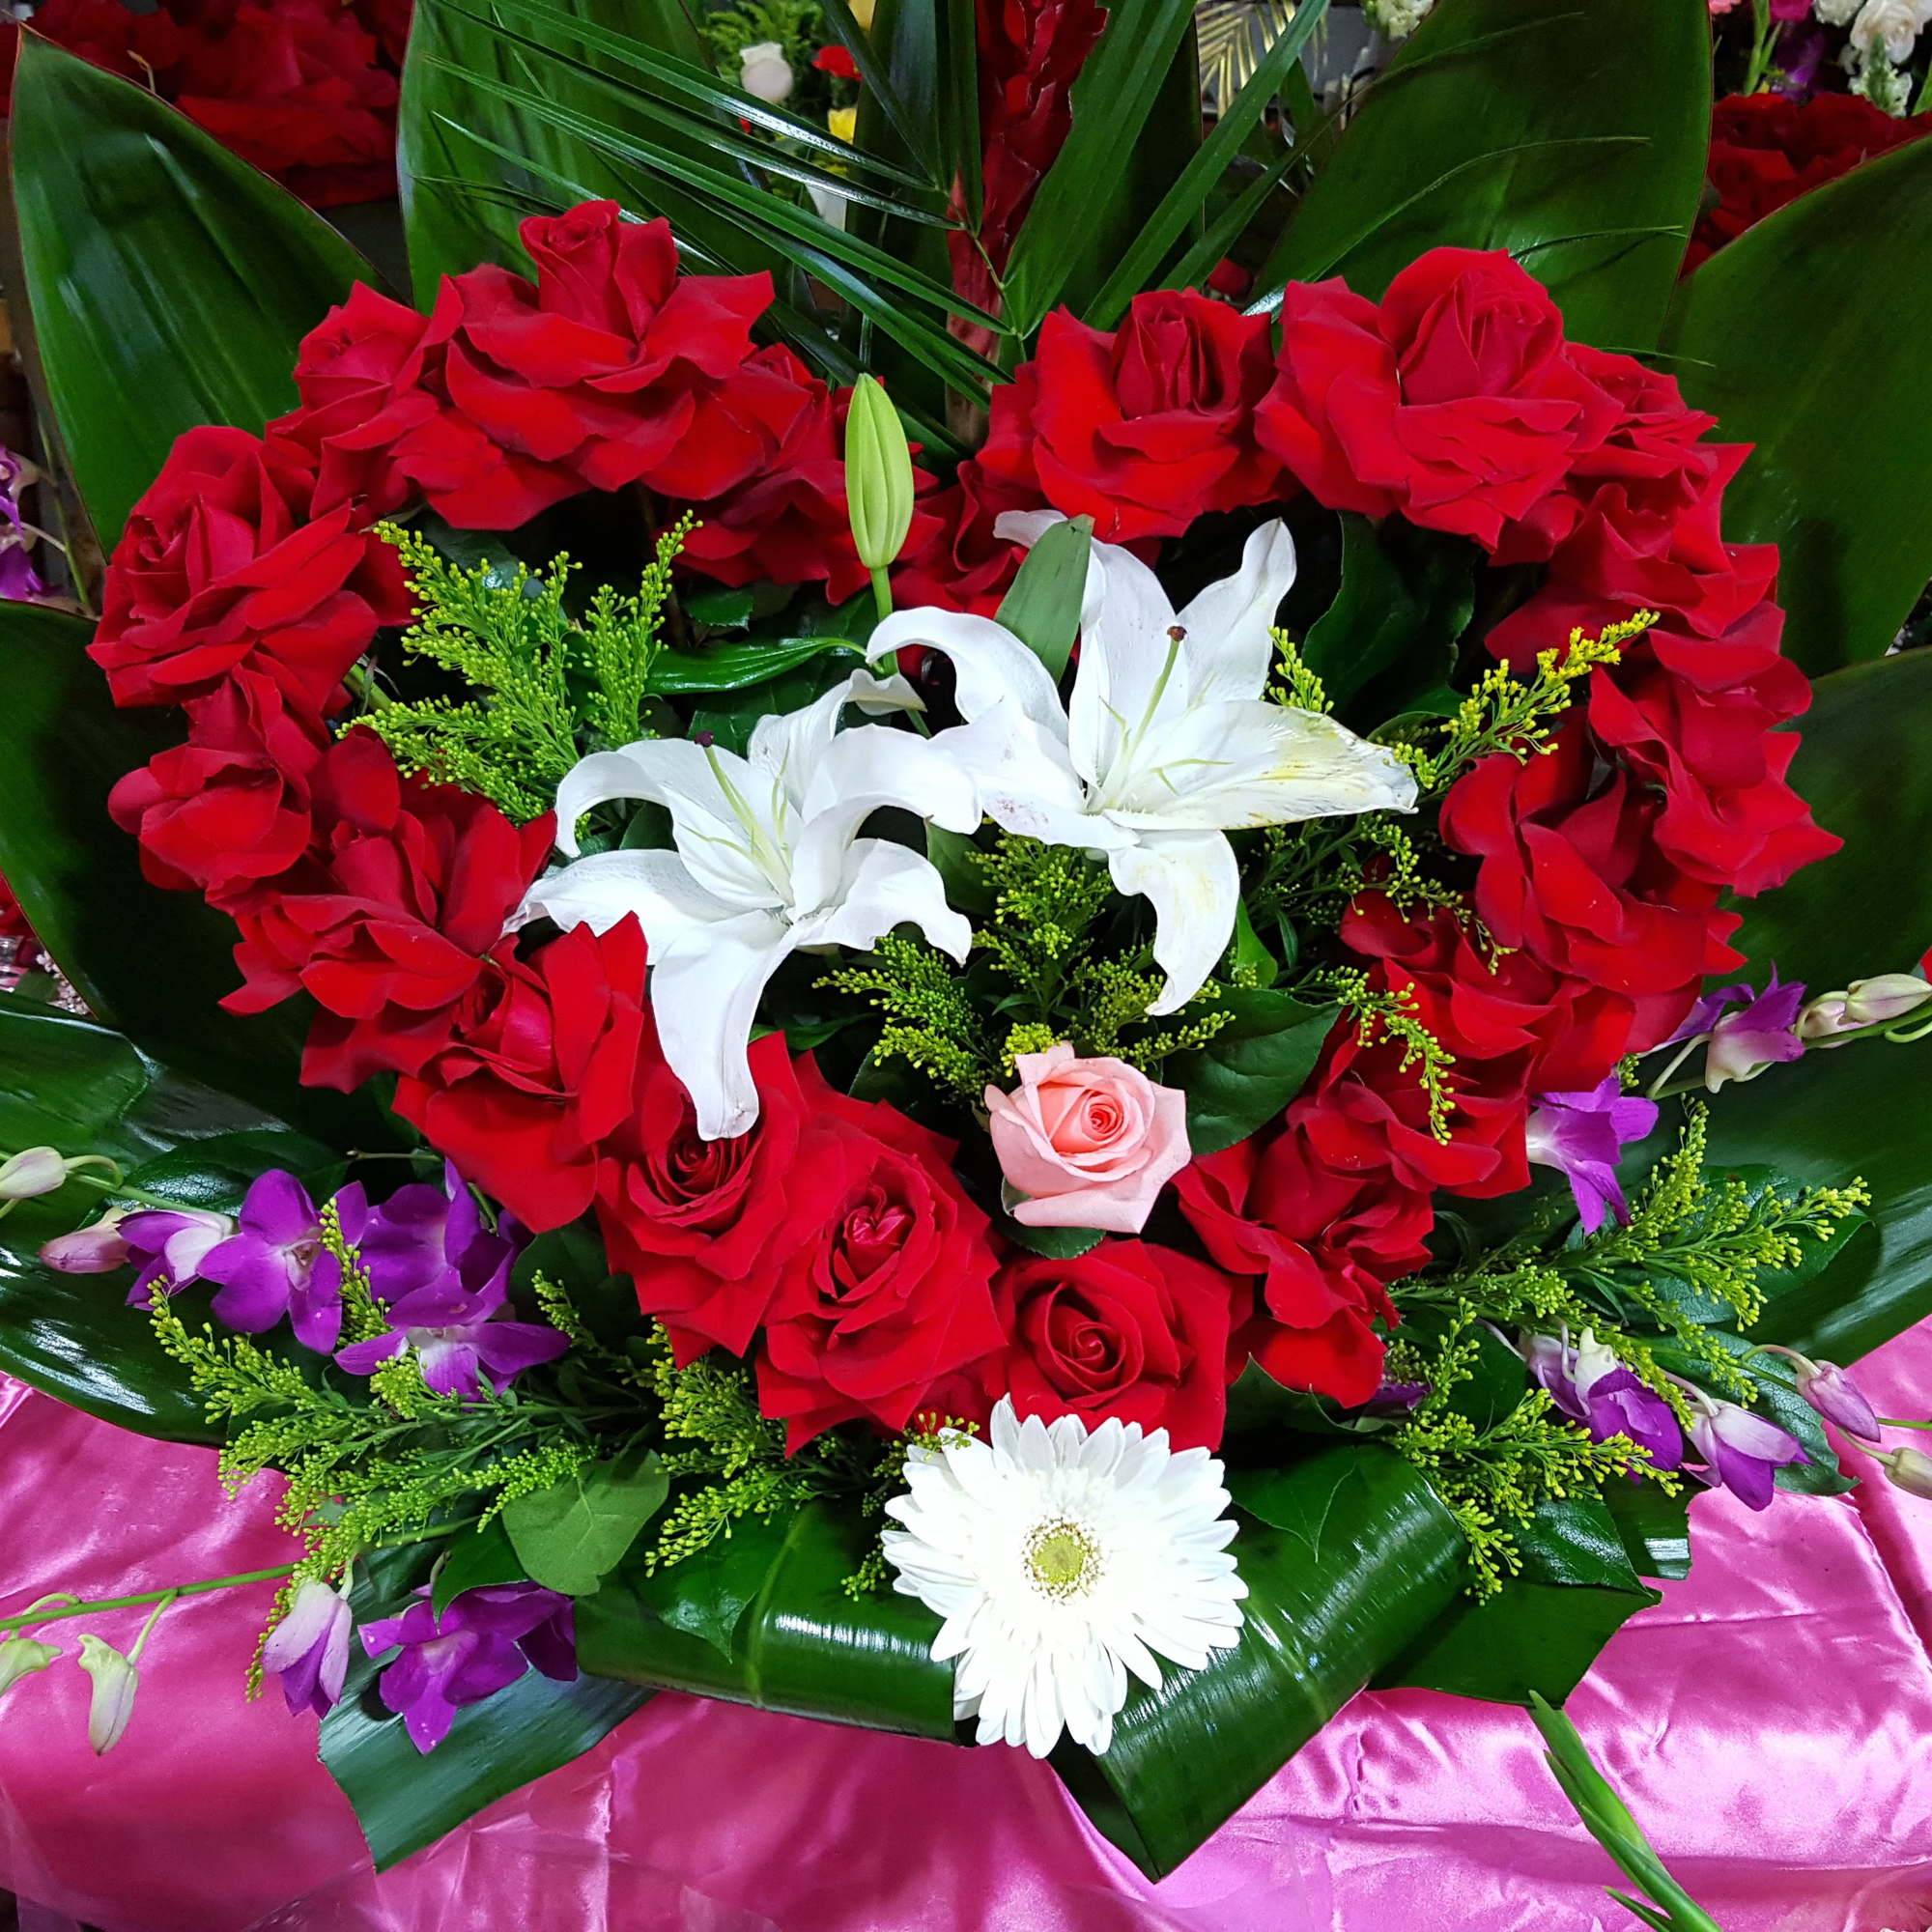 Flower Gifts Symbolize The Virgin’s Love, Peace and Compassion